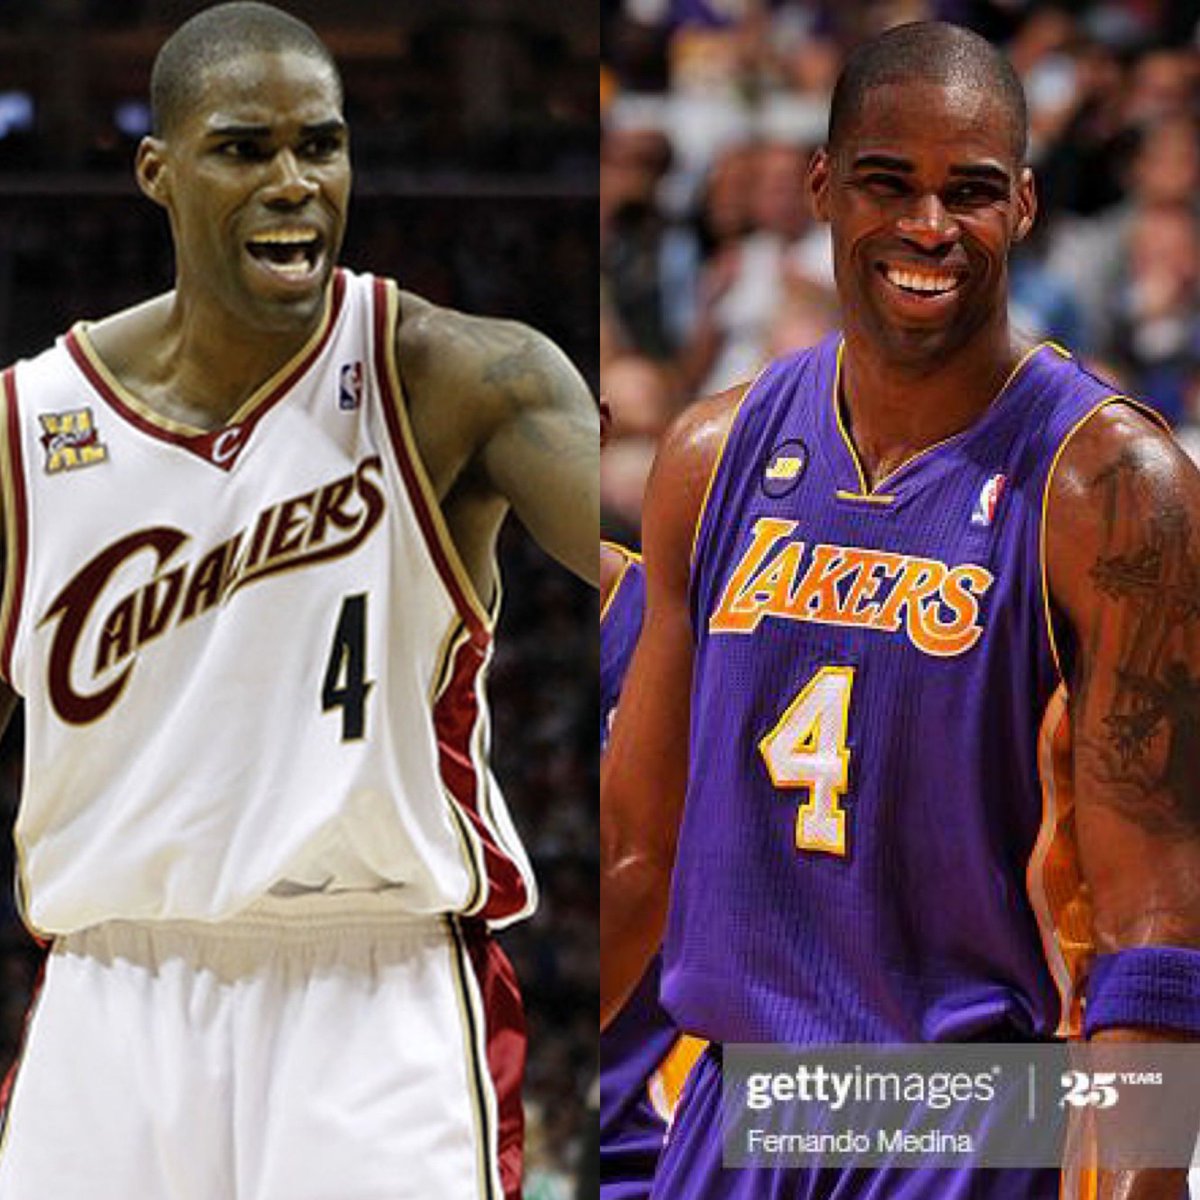 Which jersey will Antawn Jamison wear into the Hall of Fame? Time will tell